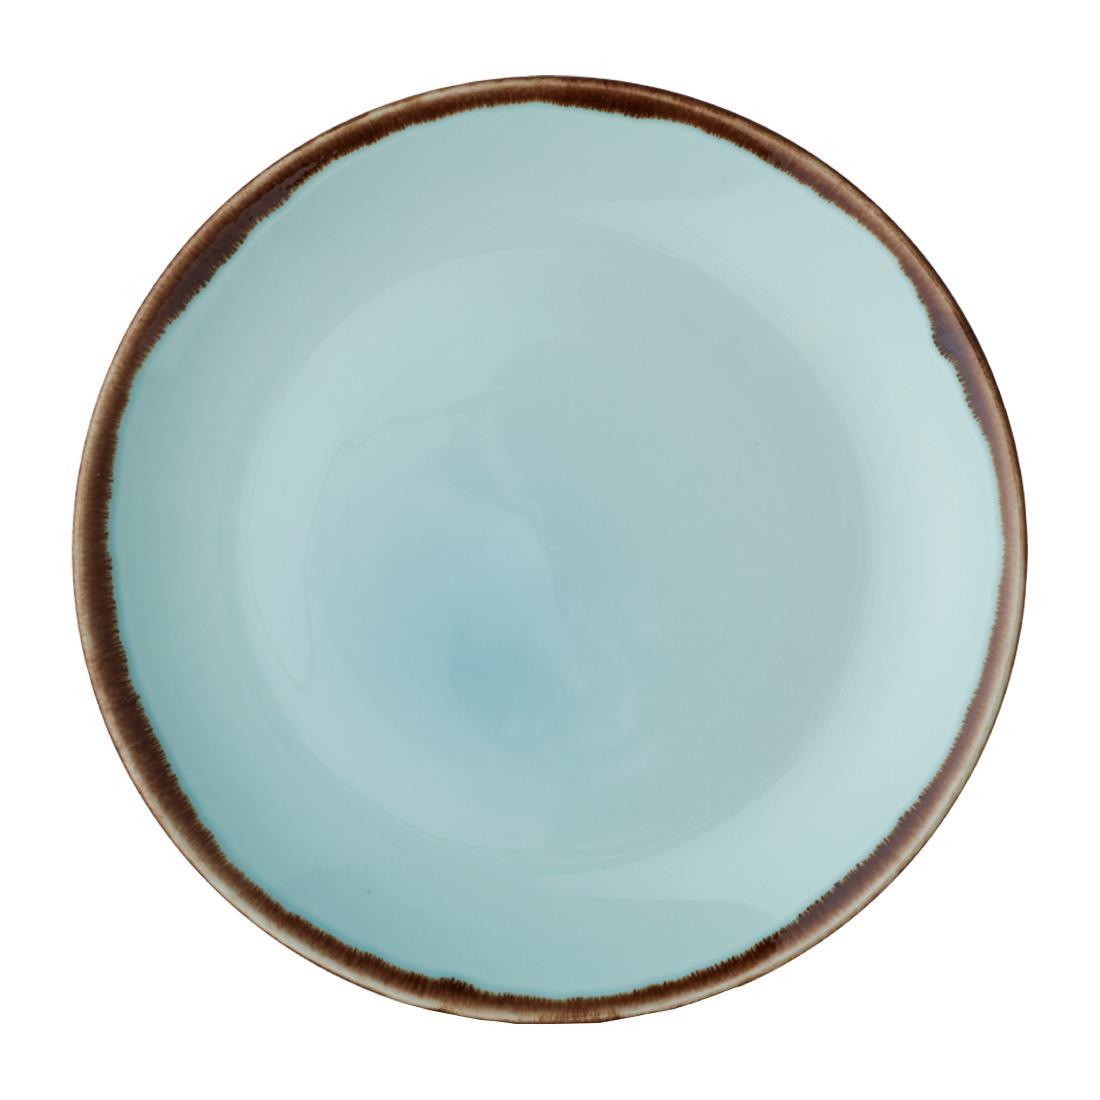 Dudson Harvest Coupe Plates Turquoise 260mm (Pack of 12) - FX163  - 1